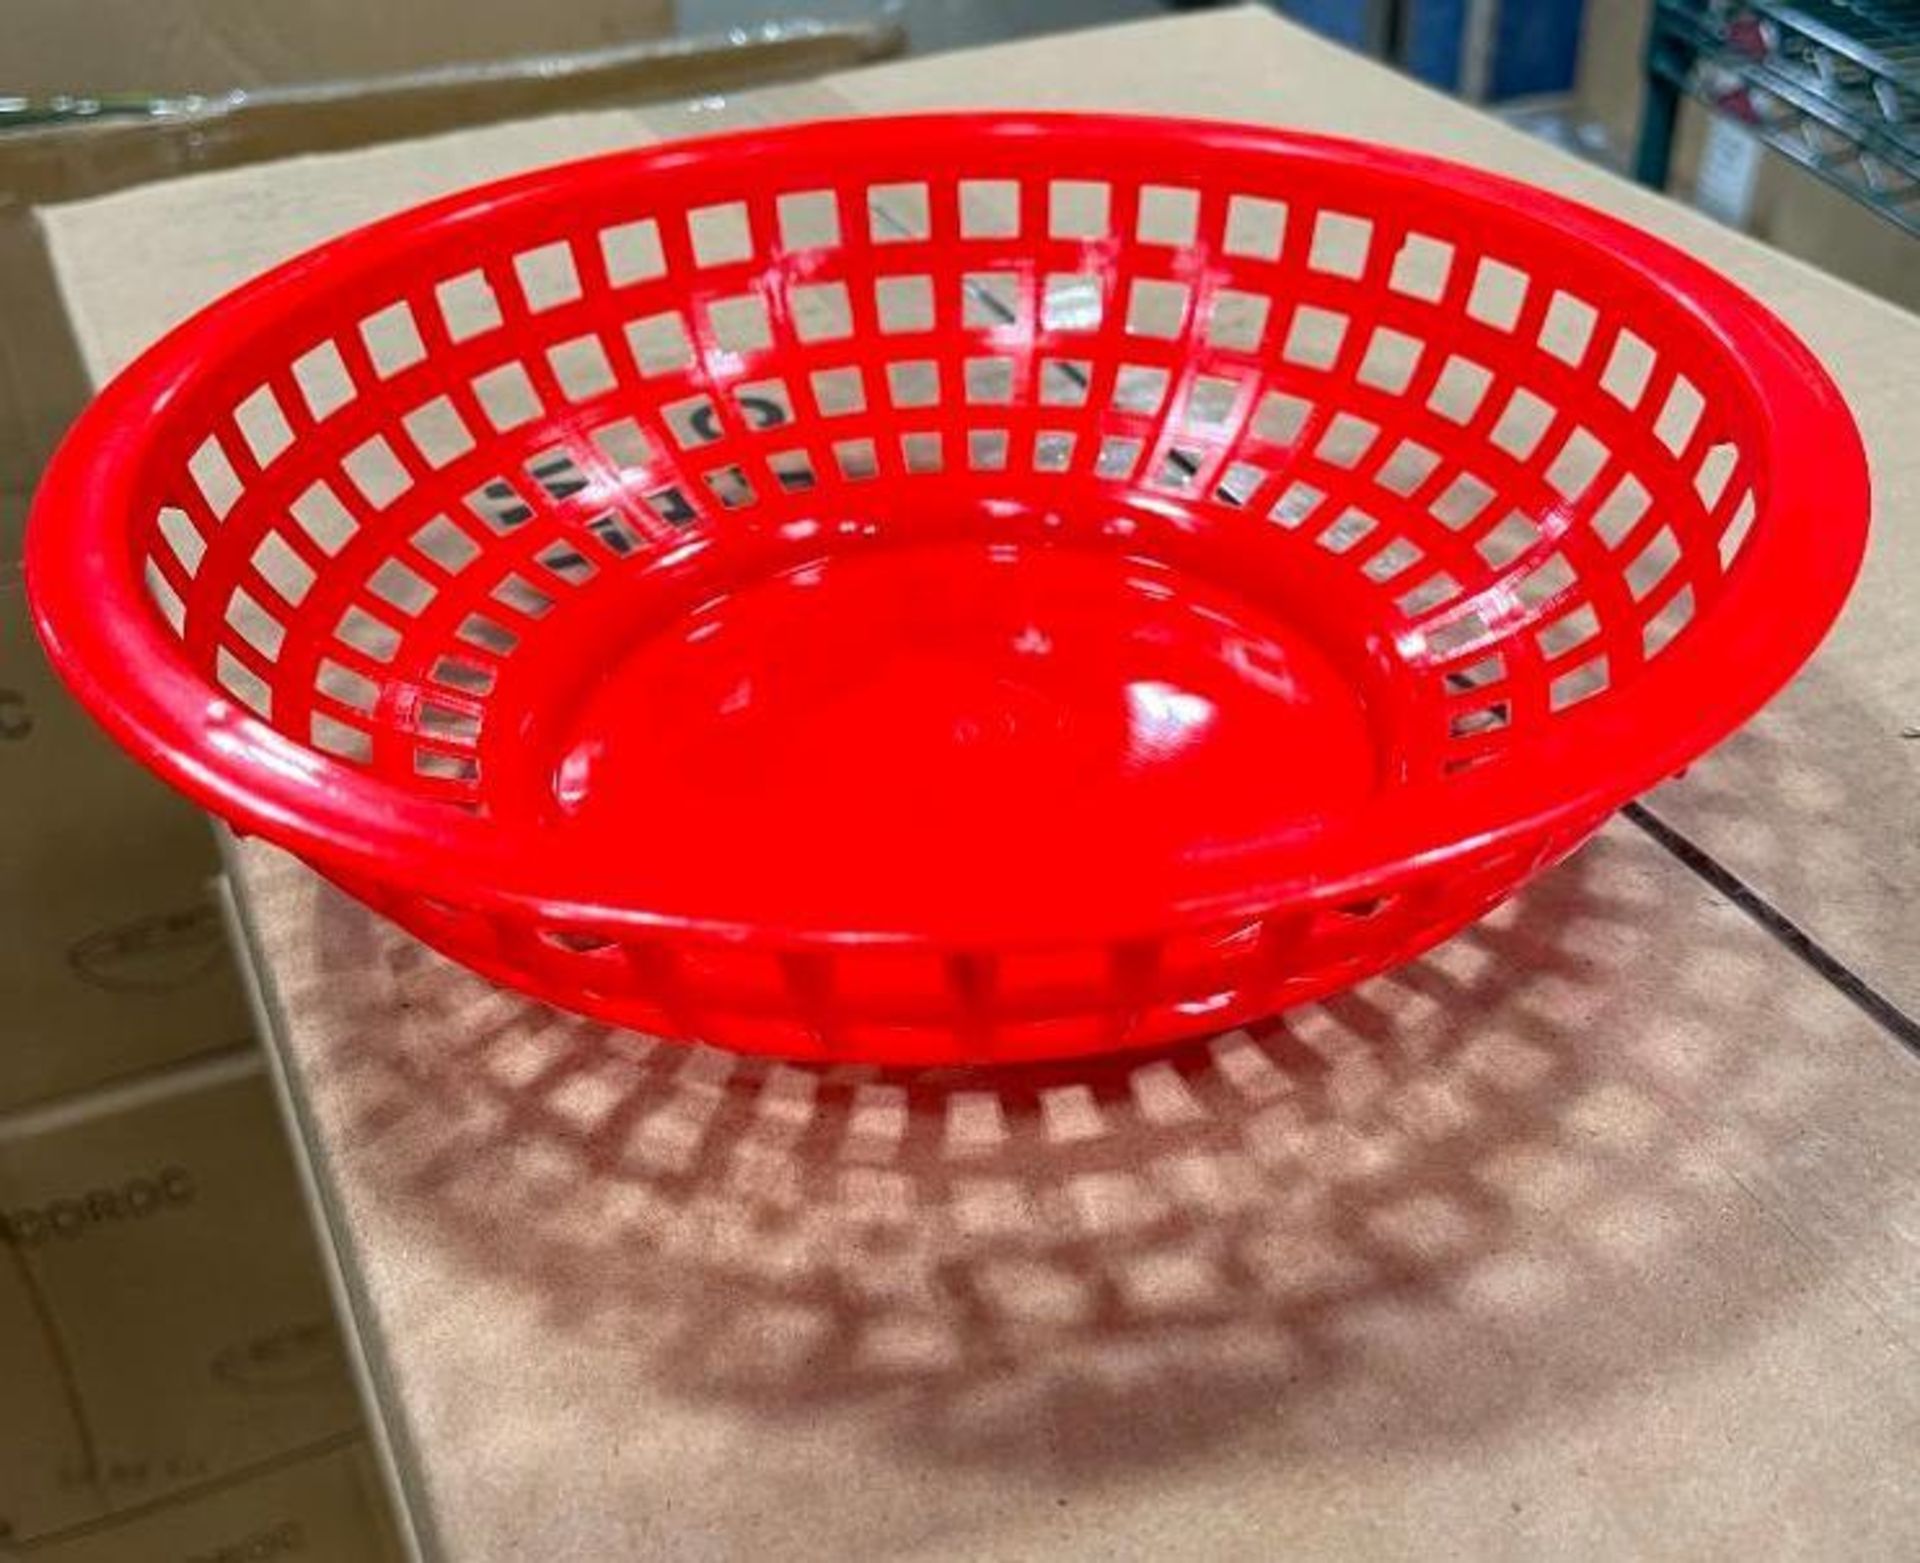 8" RED ROUND PLASTIC FOOD BASKET, JOHNSON ROSE 80752 - LOT OF 108 - NEW